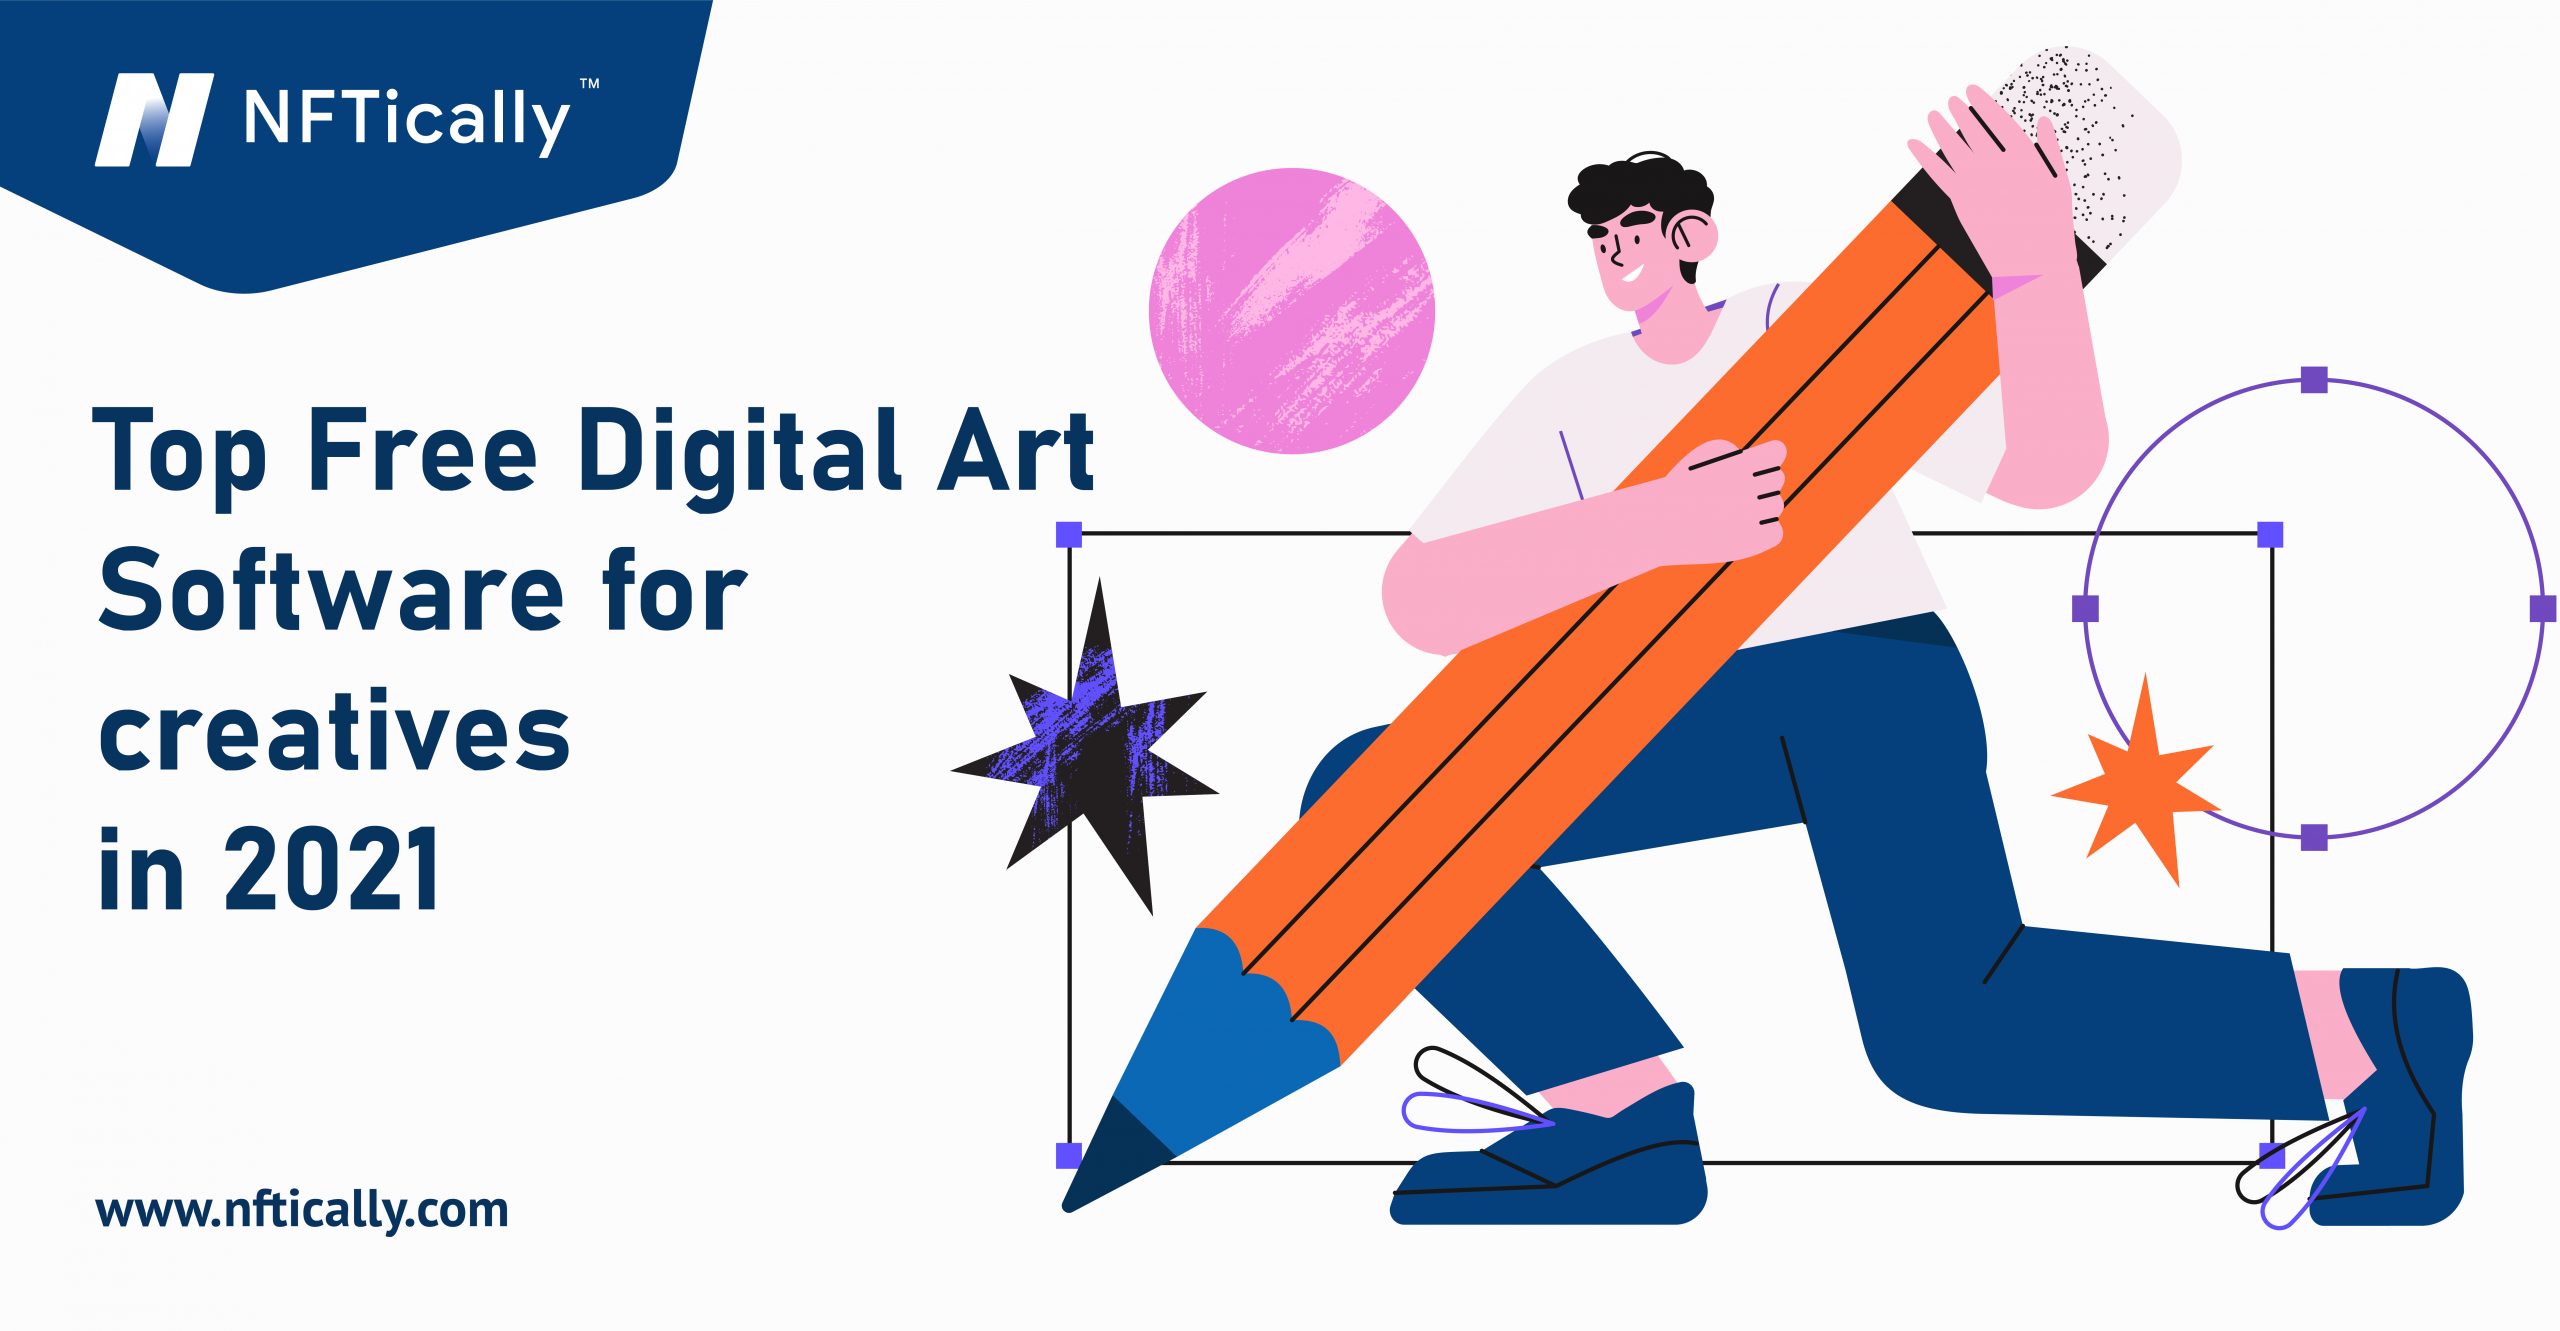 Top Free Digital Art Software for creatives in 2021